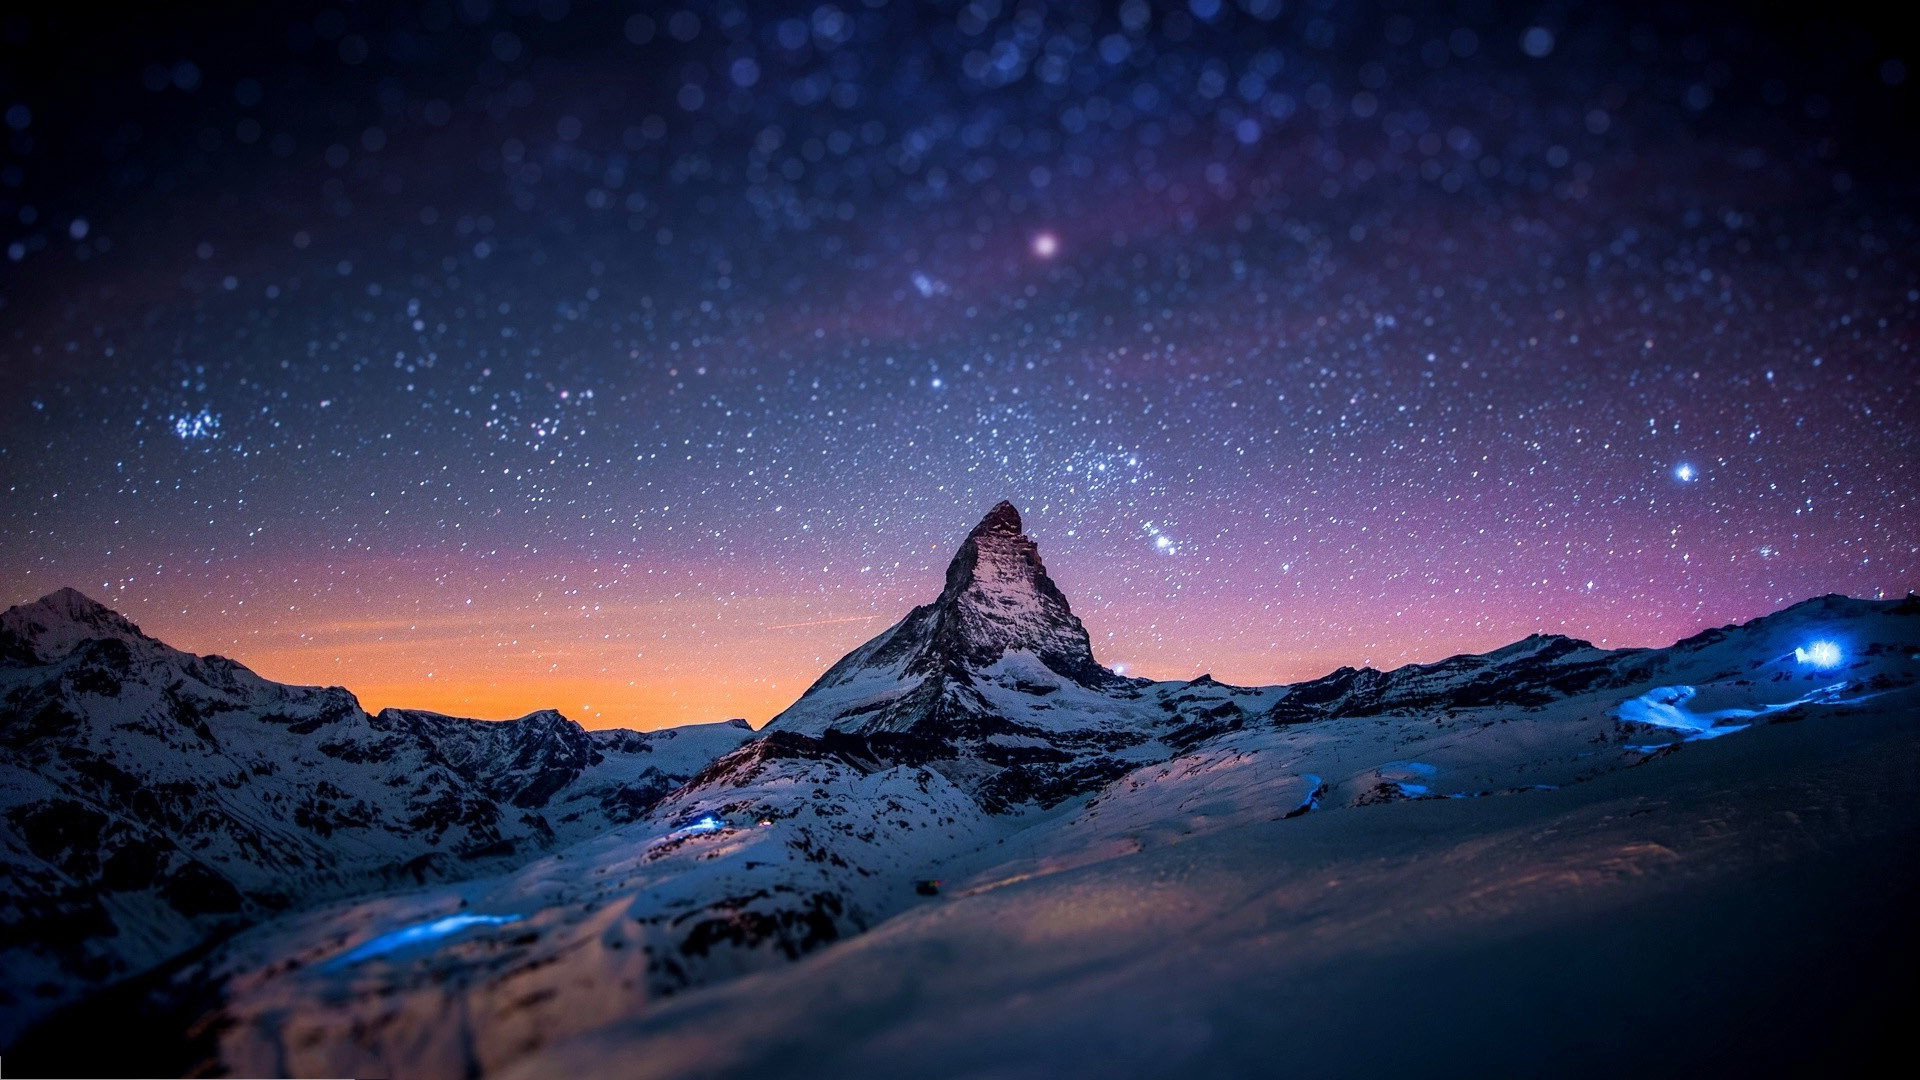 Snow Mountain Wallpaper HD (67+ images)